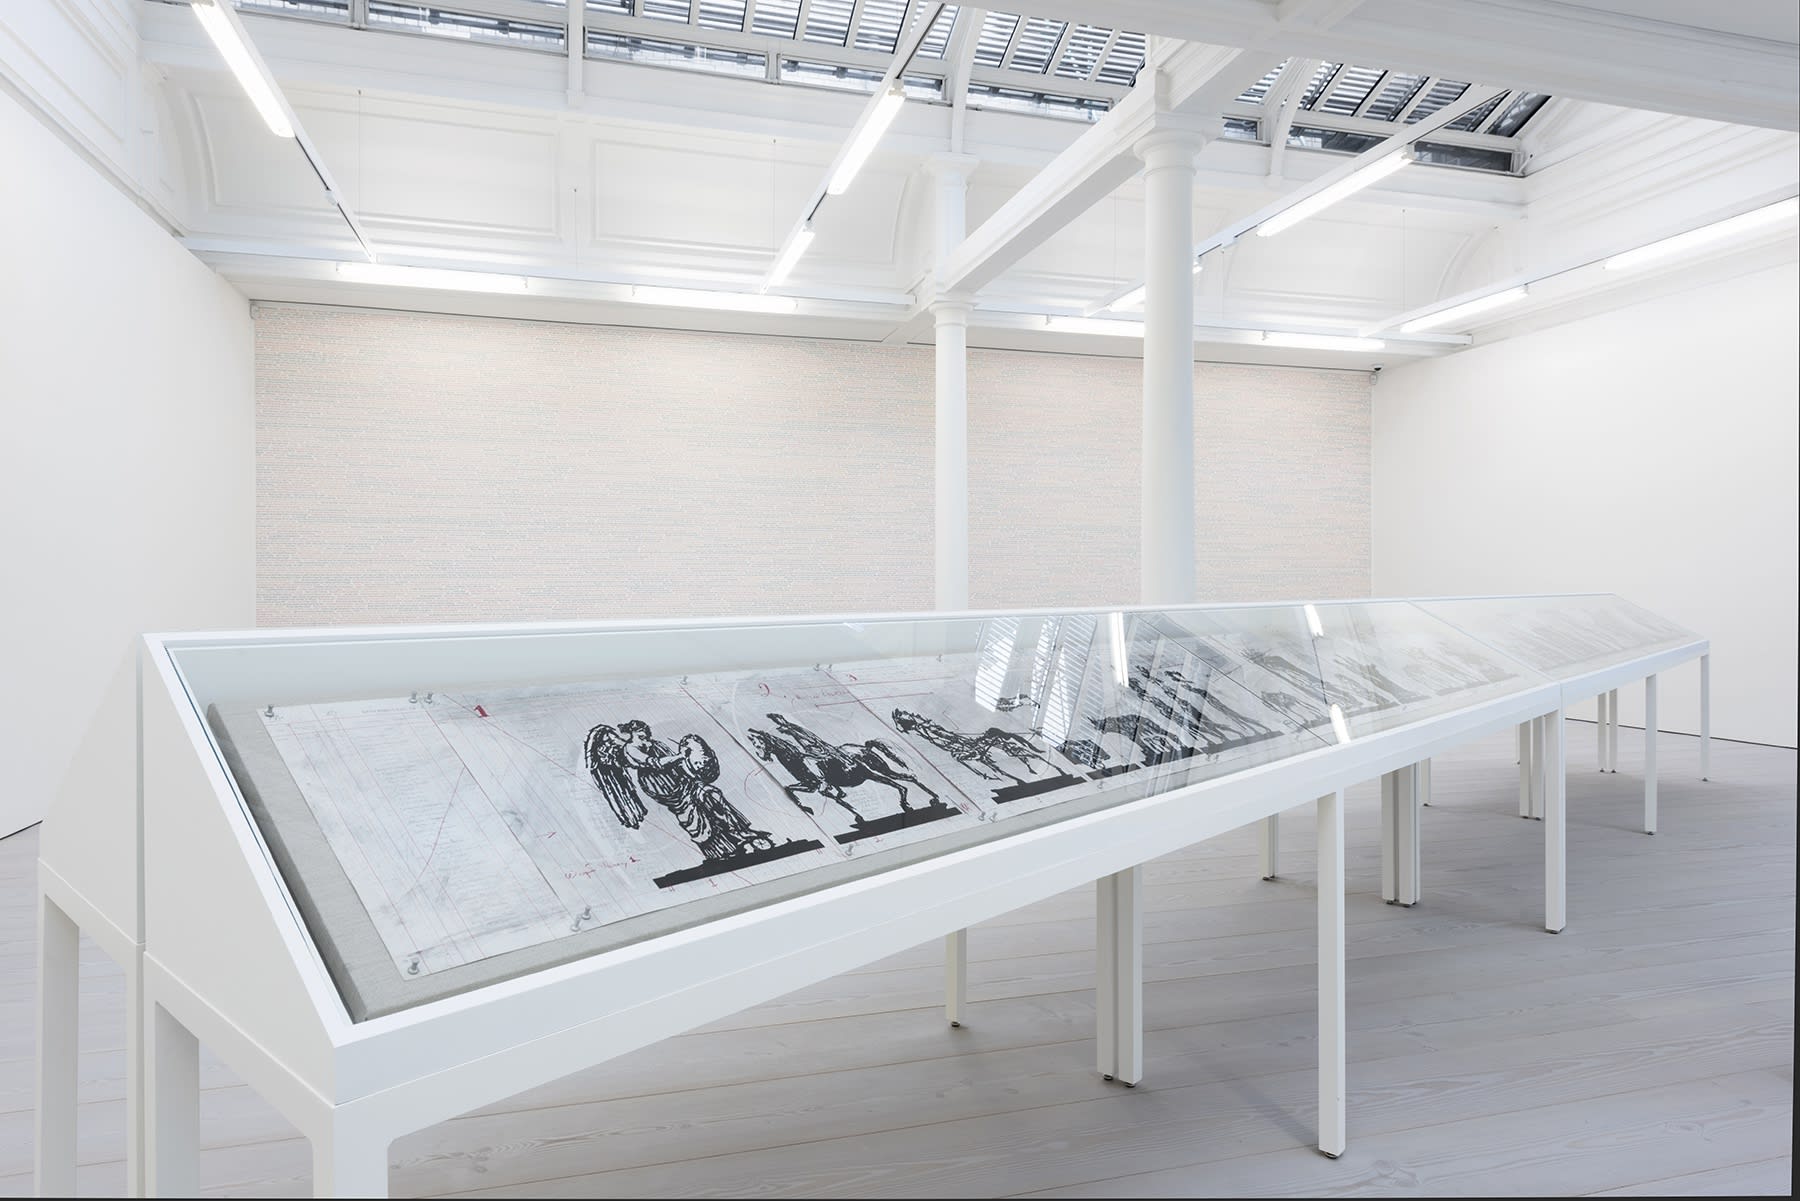 Charcoal drawings are displayed in a long vitrine in a white room with skylights.